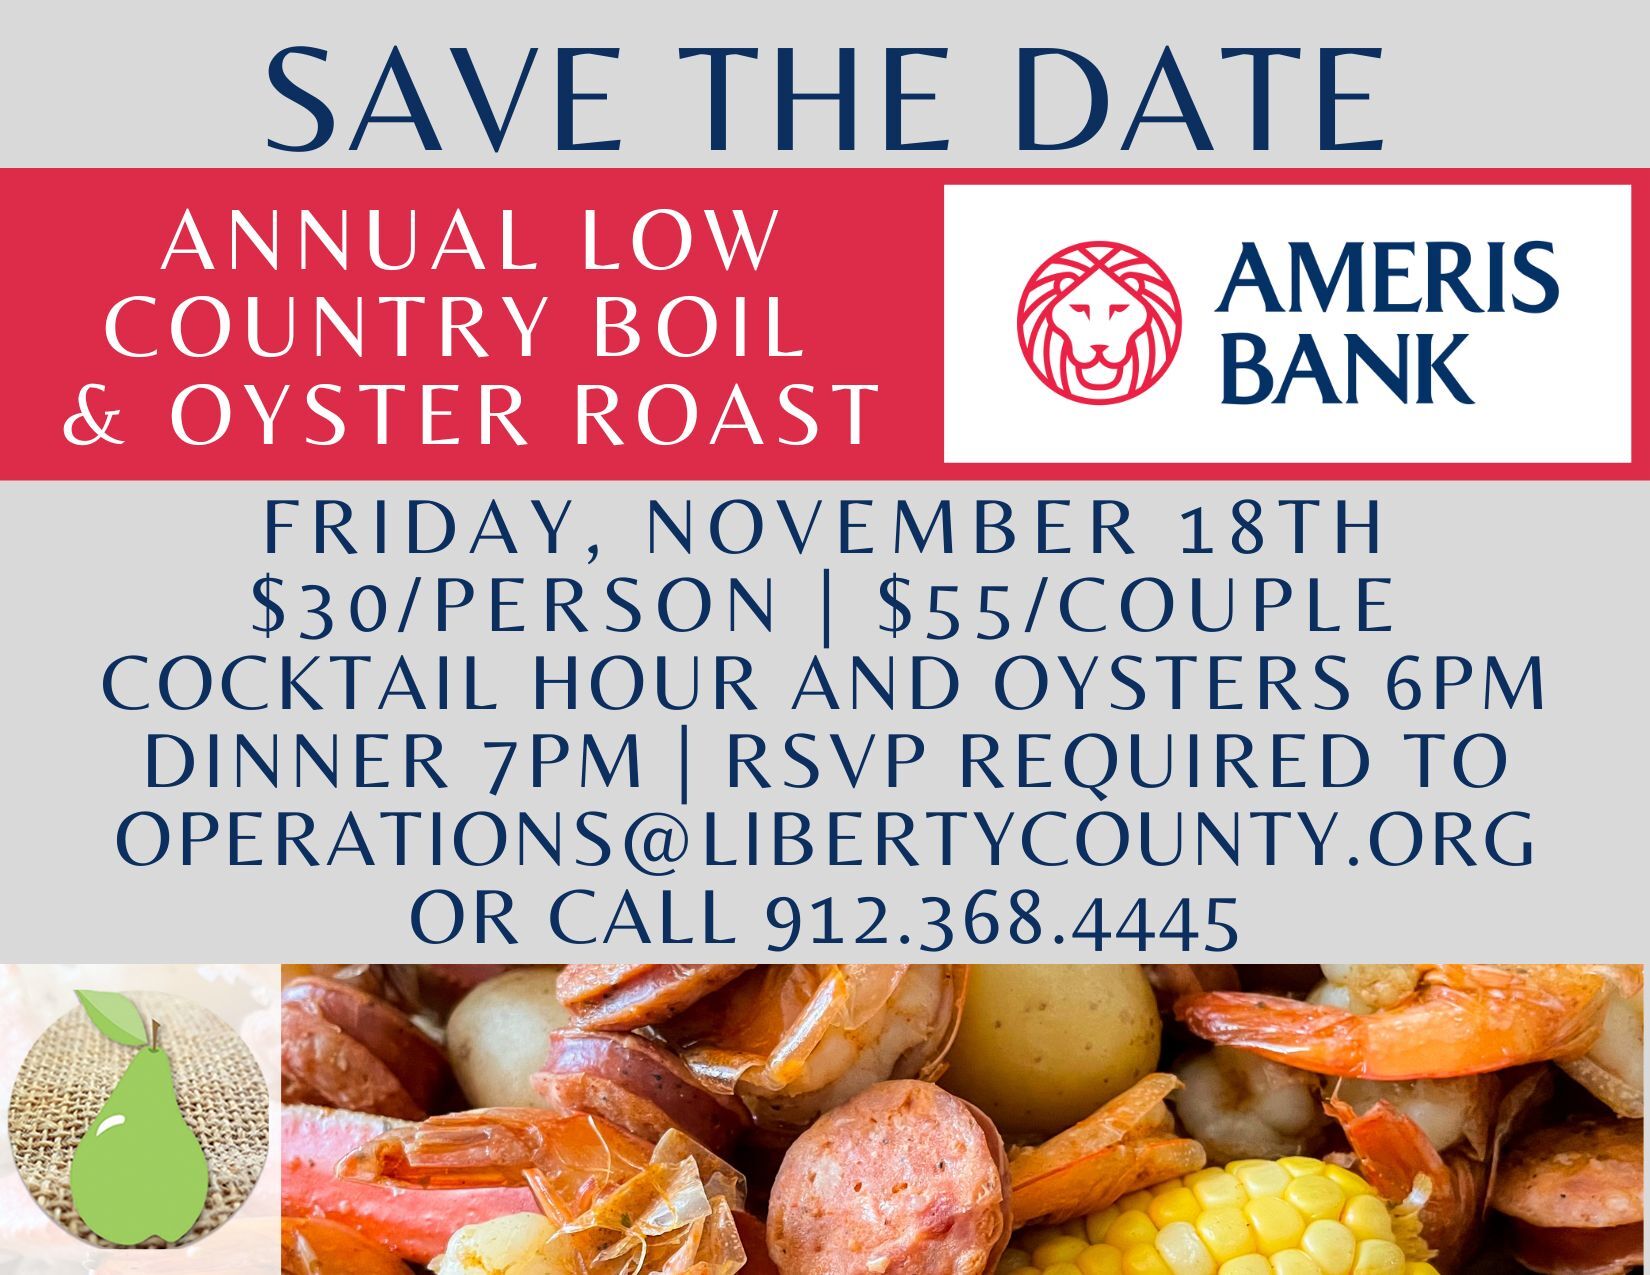 Flyer for Annual Low Country Boil & Oyster Roast